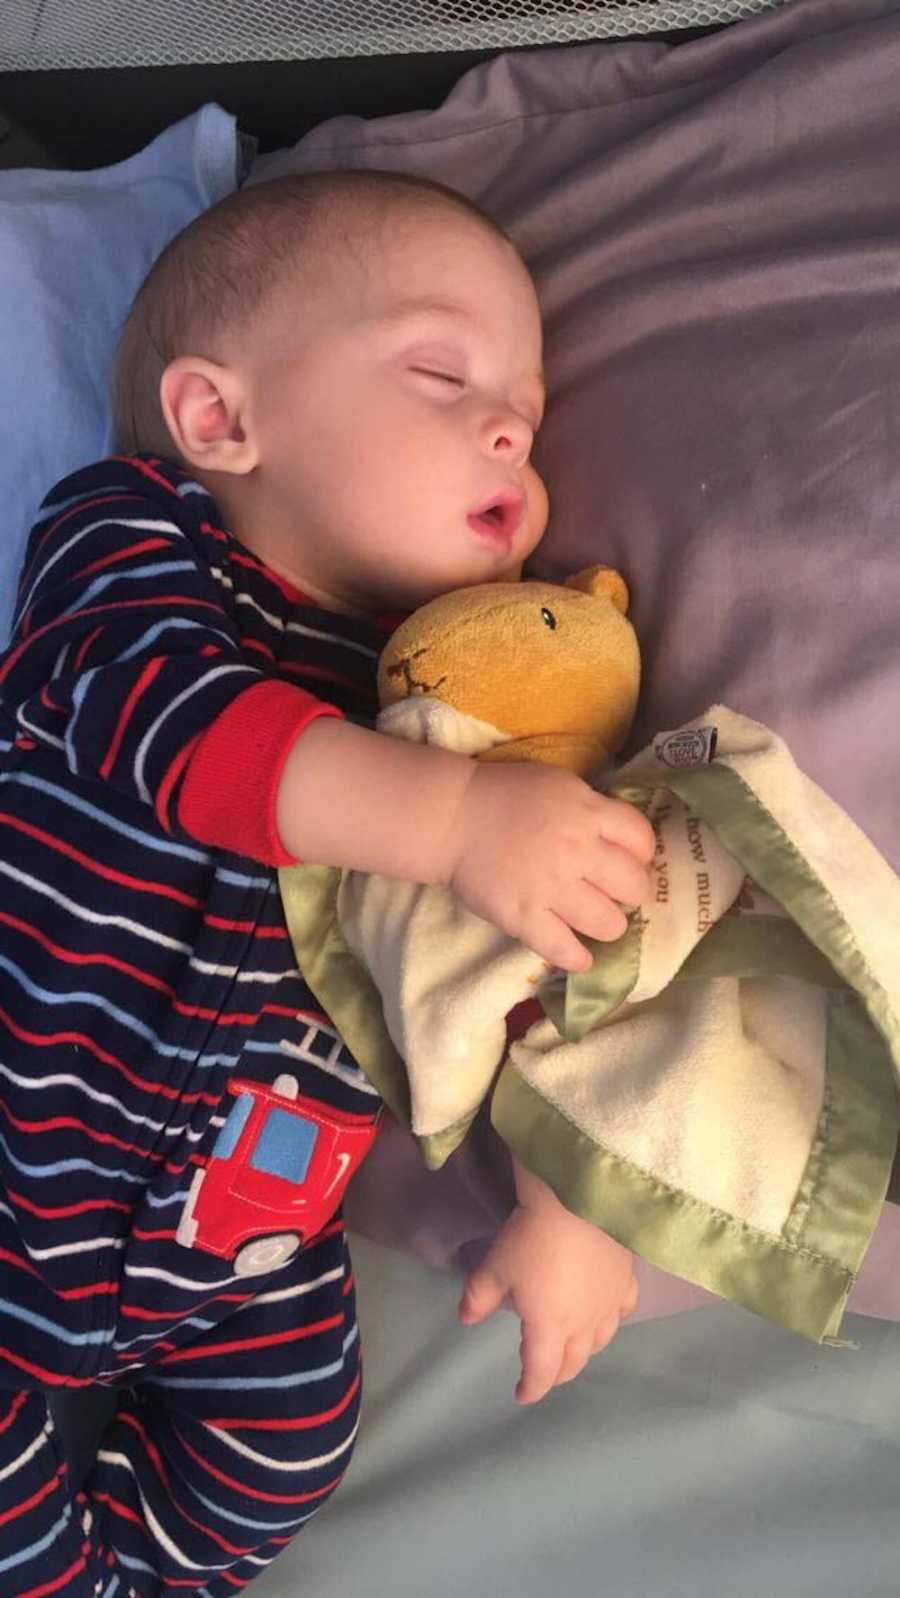 Baby boy lays in bed asleep holding on to blanket